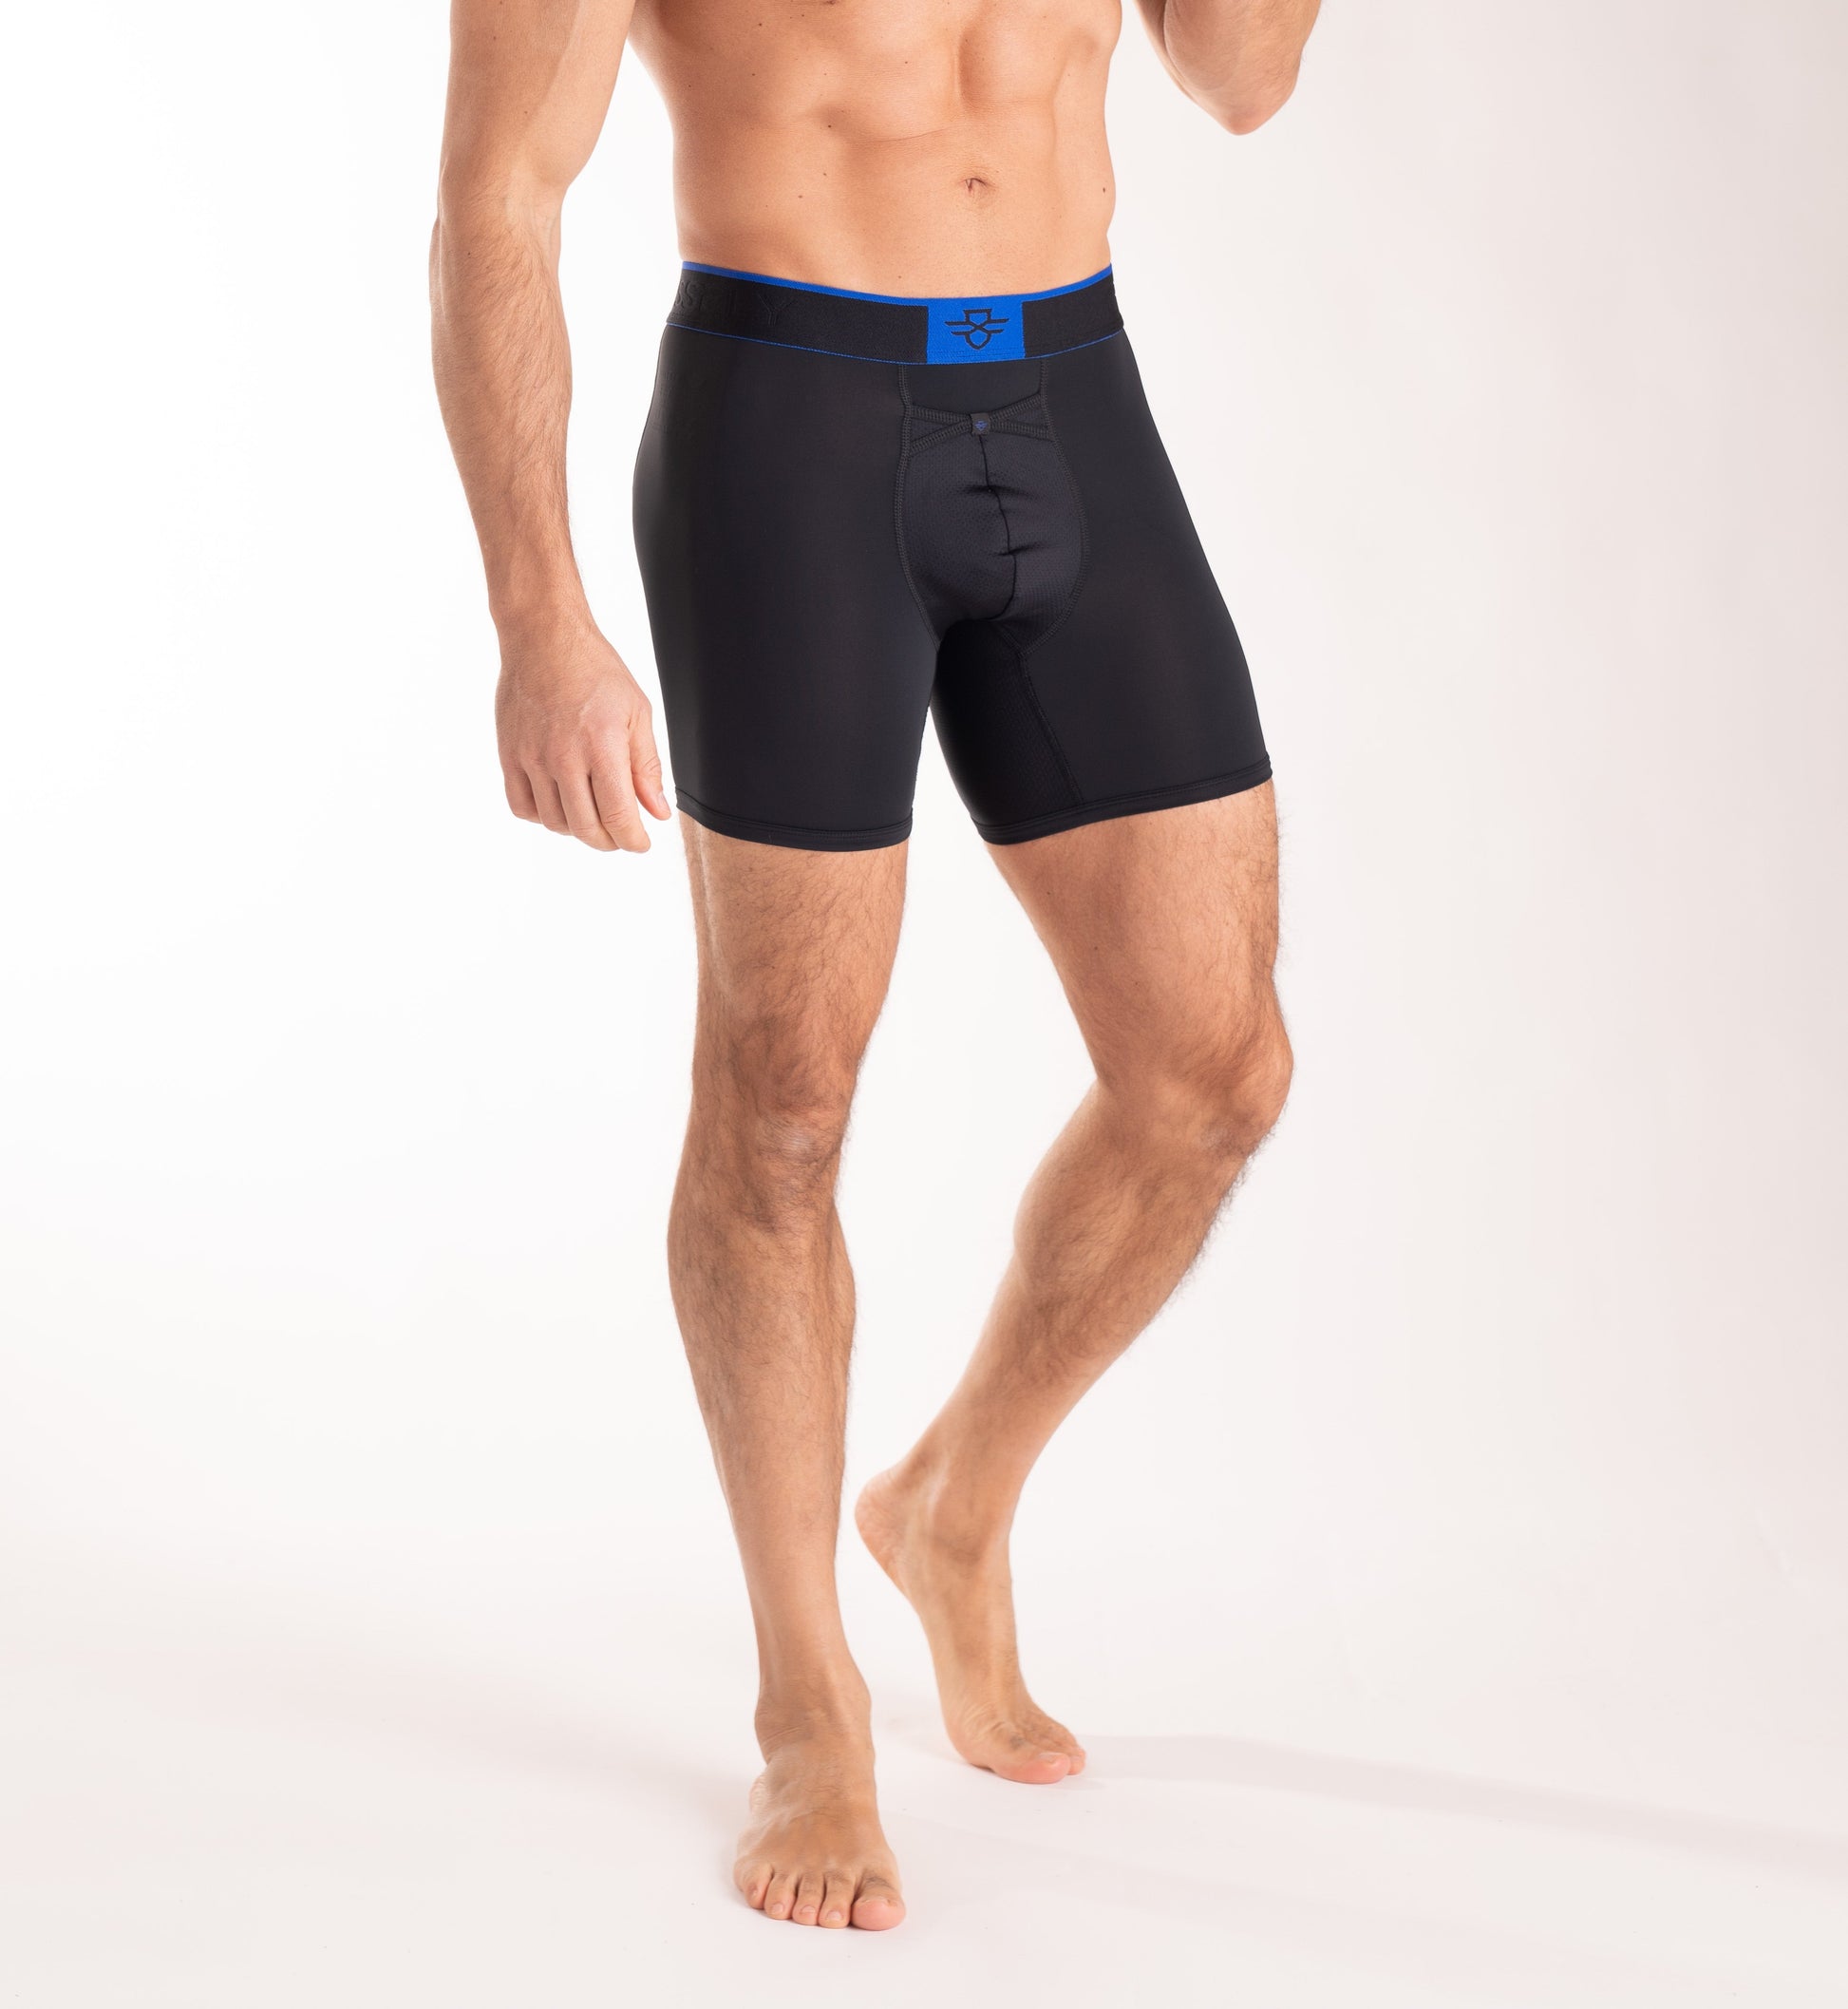 Crossfly men's Pro 7" black / royal boxers from the Performance series, featuring X-Fly and Coccoon internal pocket support.